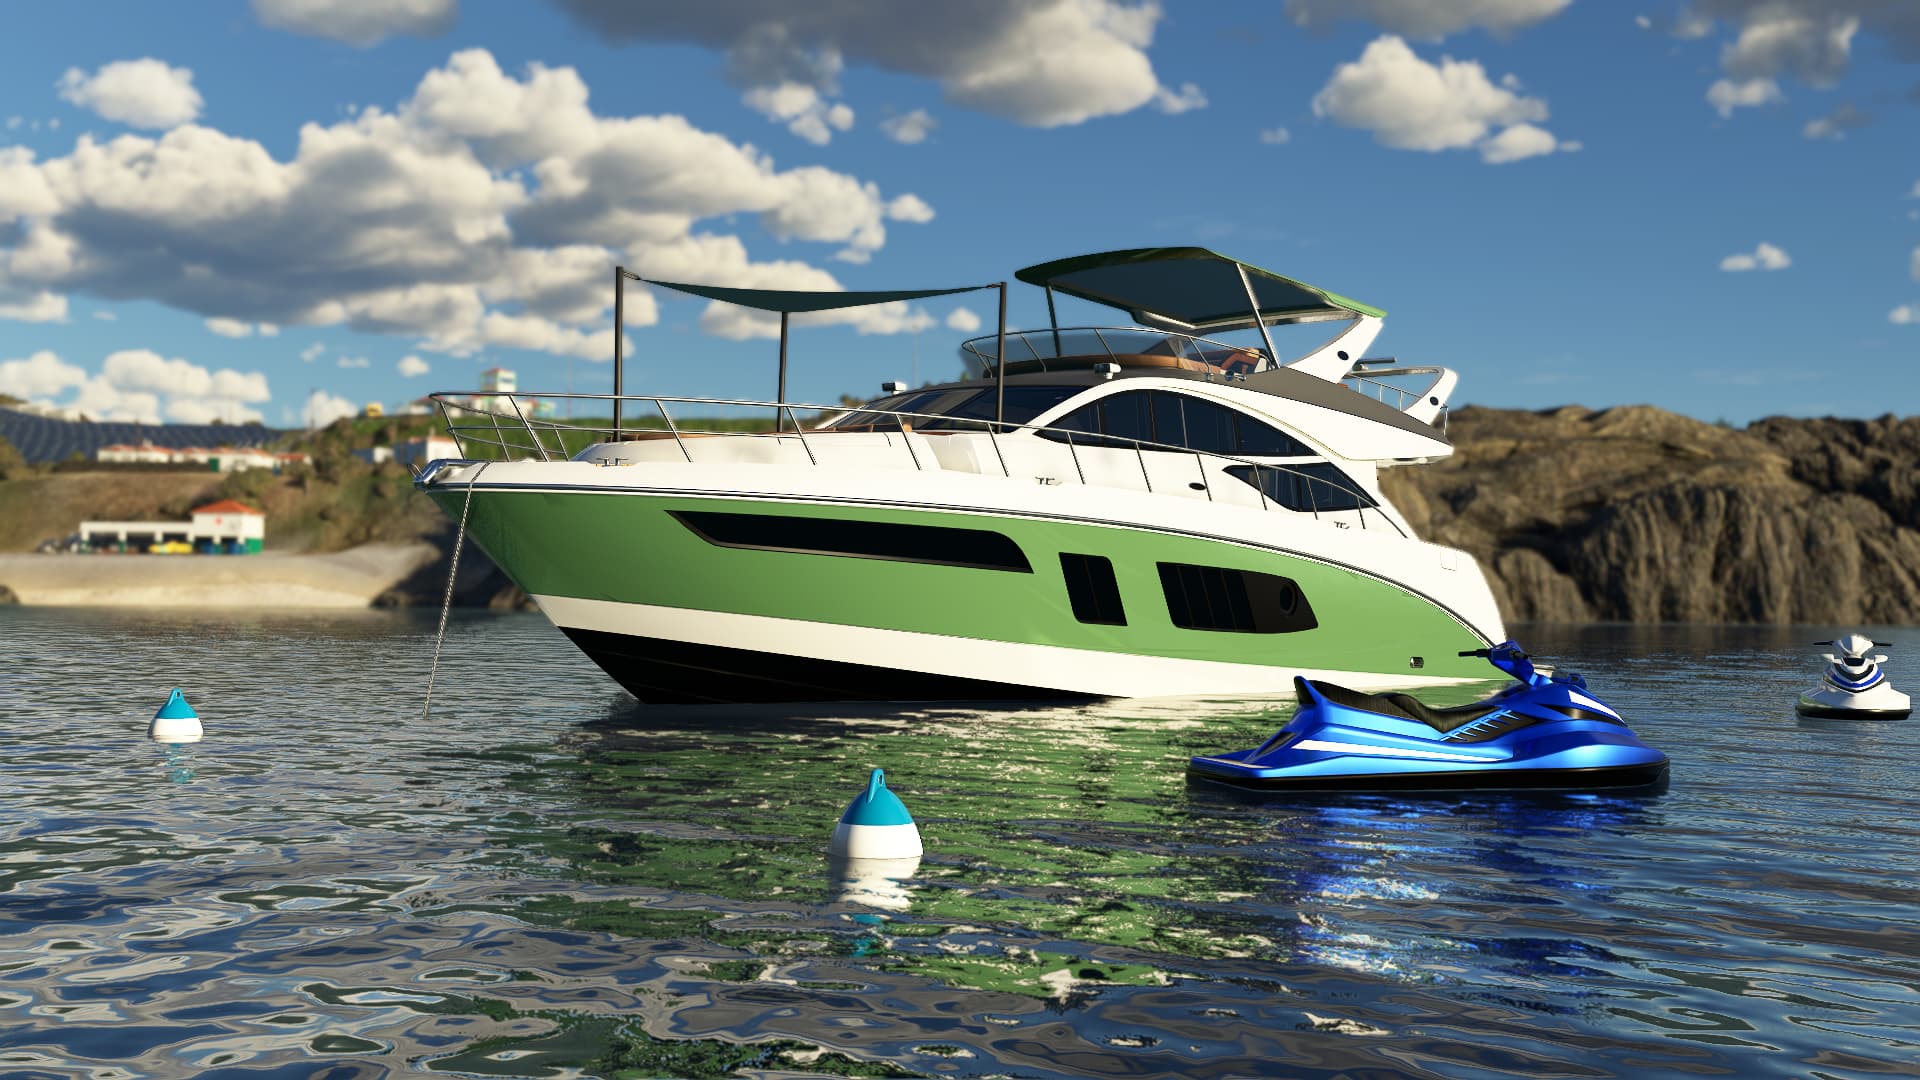 A white and green yacht and a blue personal water craft are docked next to a rocky shoreline.